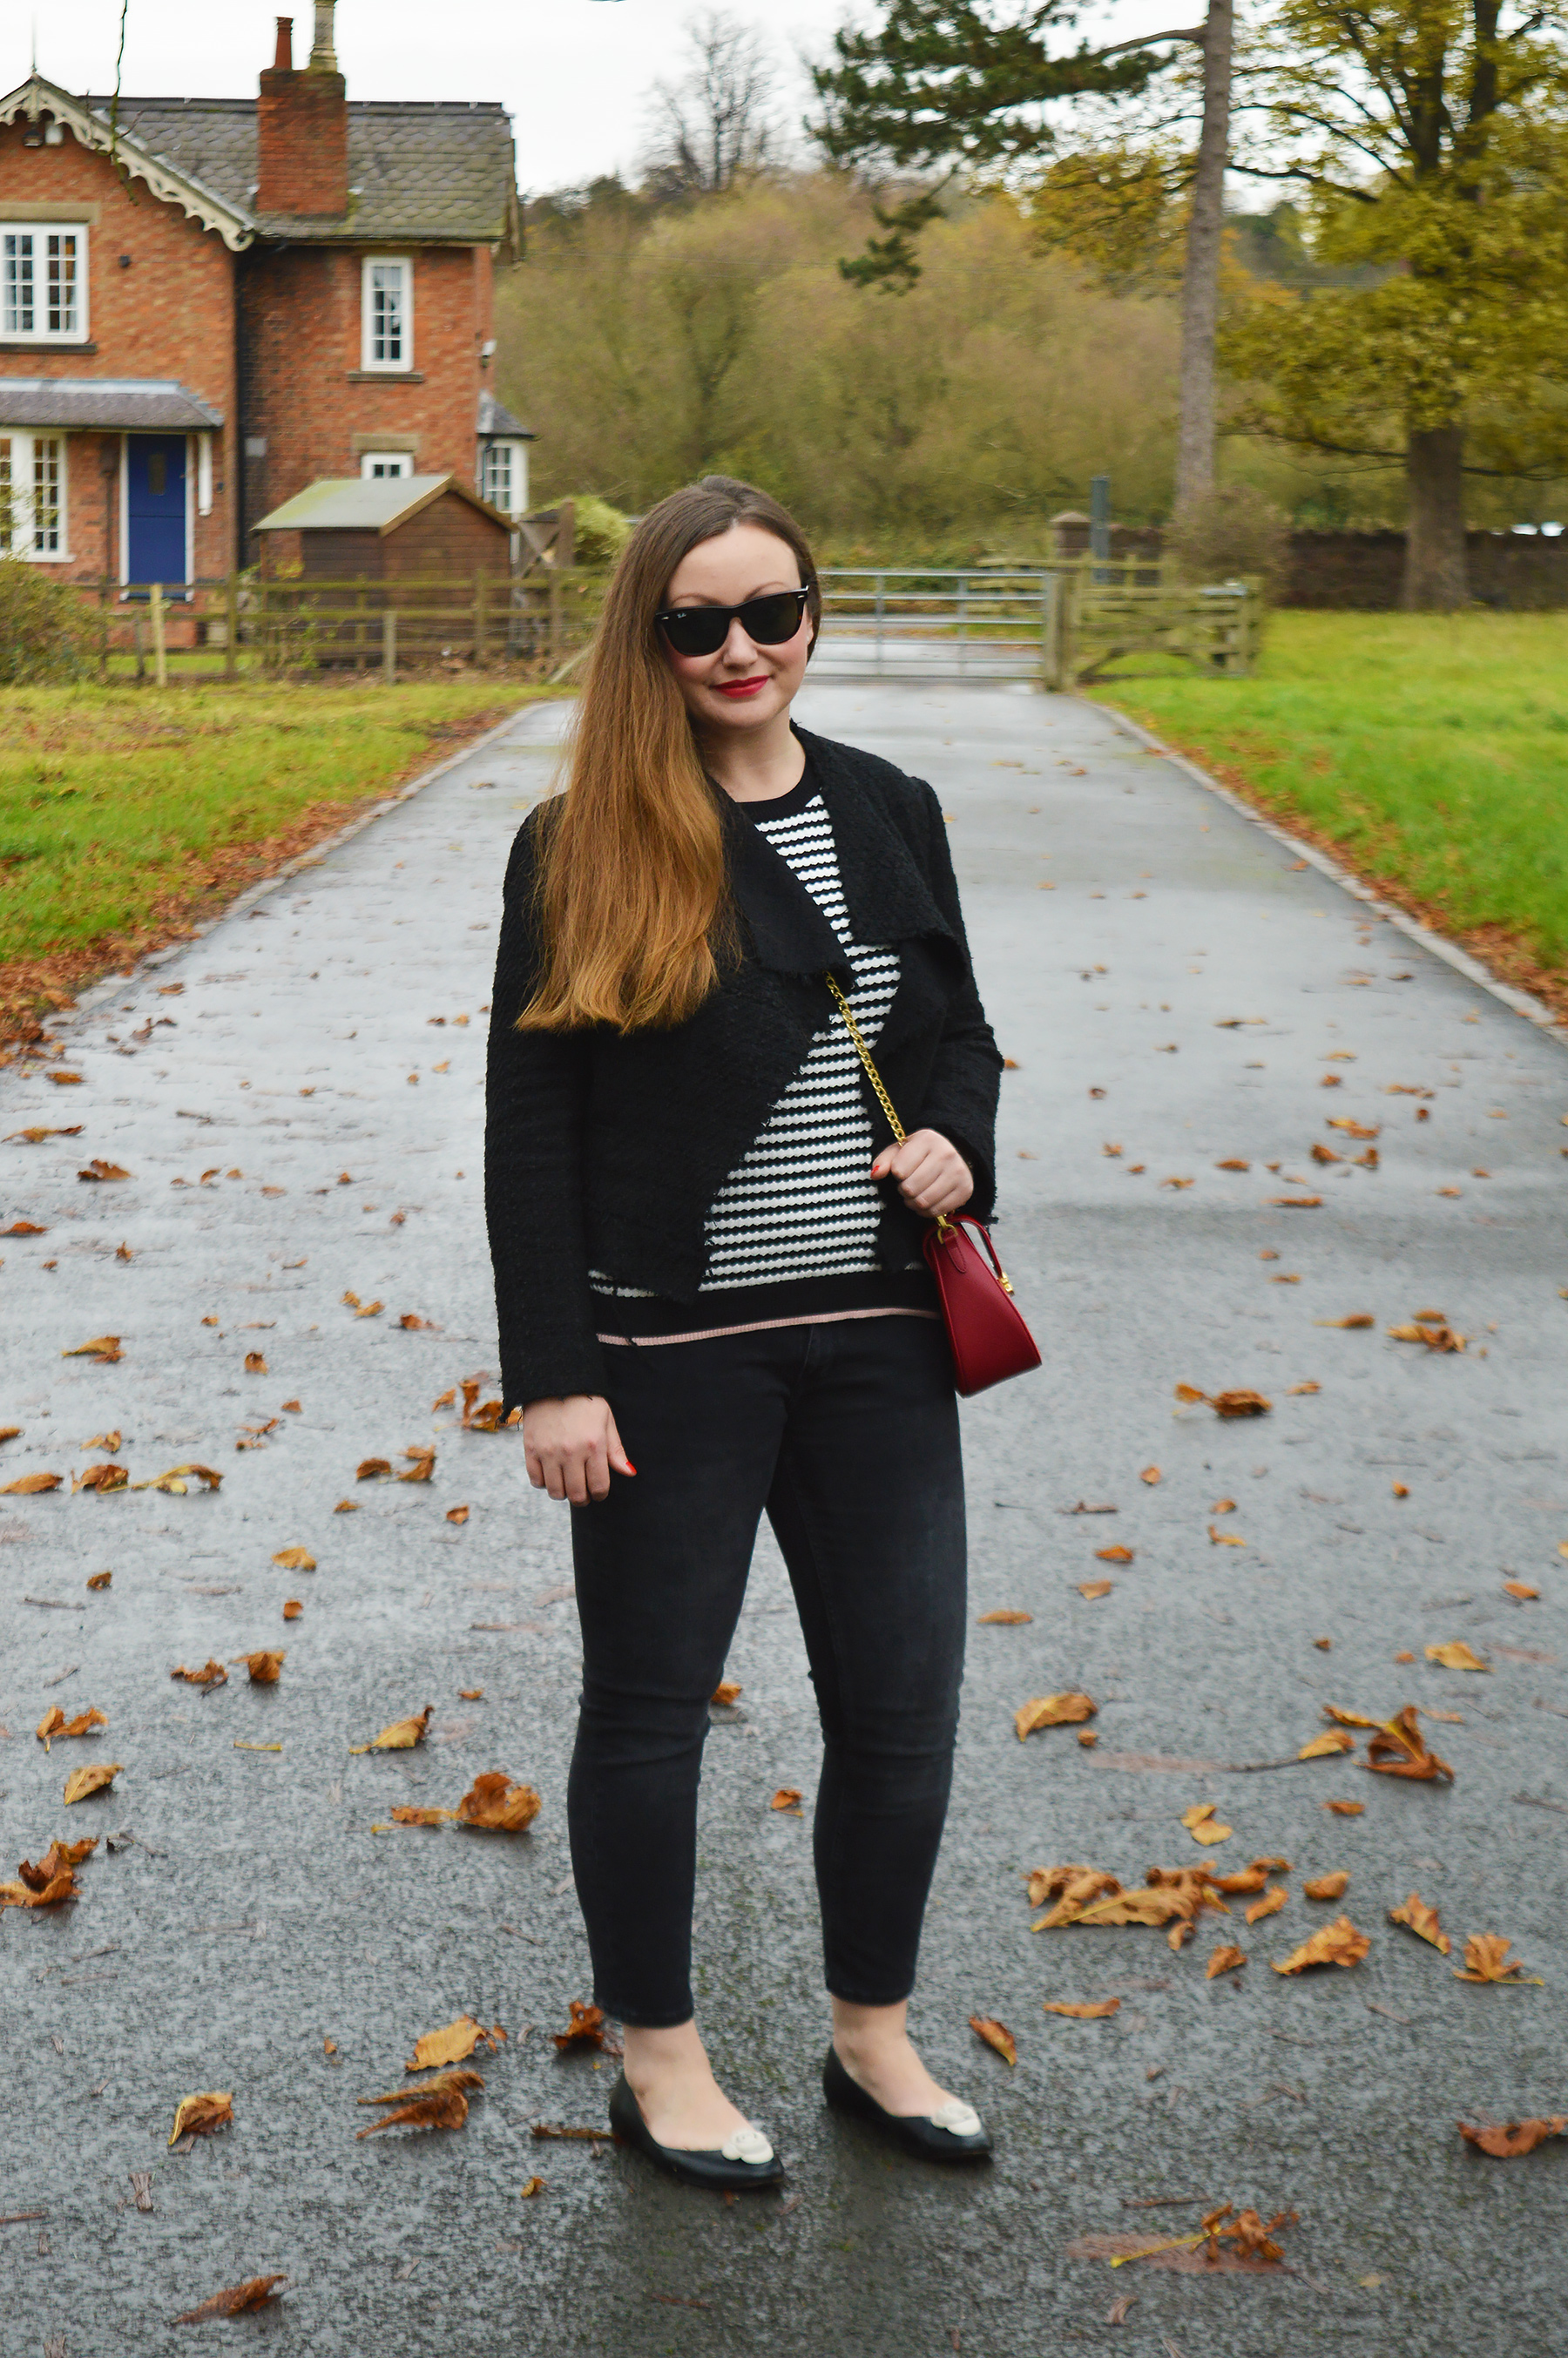 Black and white outfit with a pop of red bag